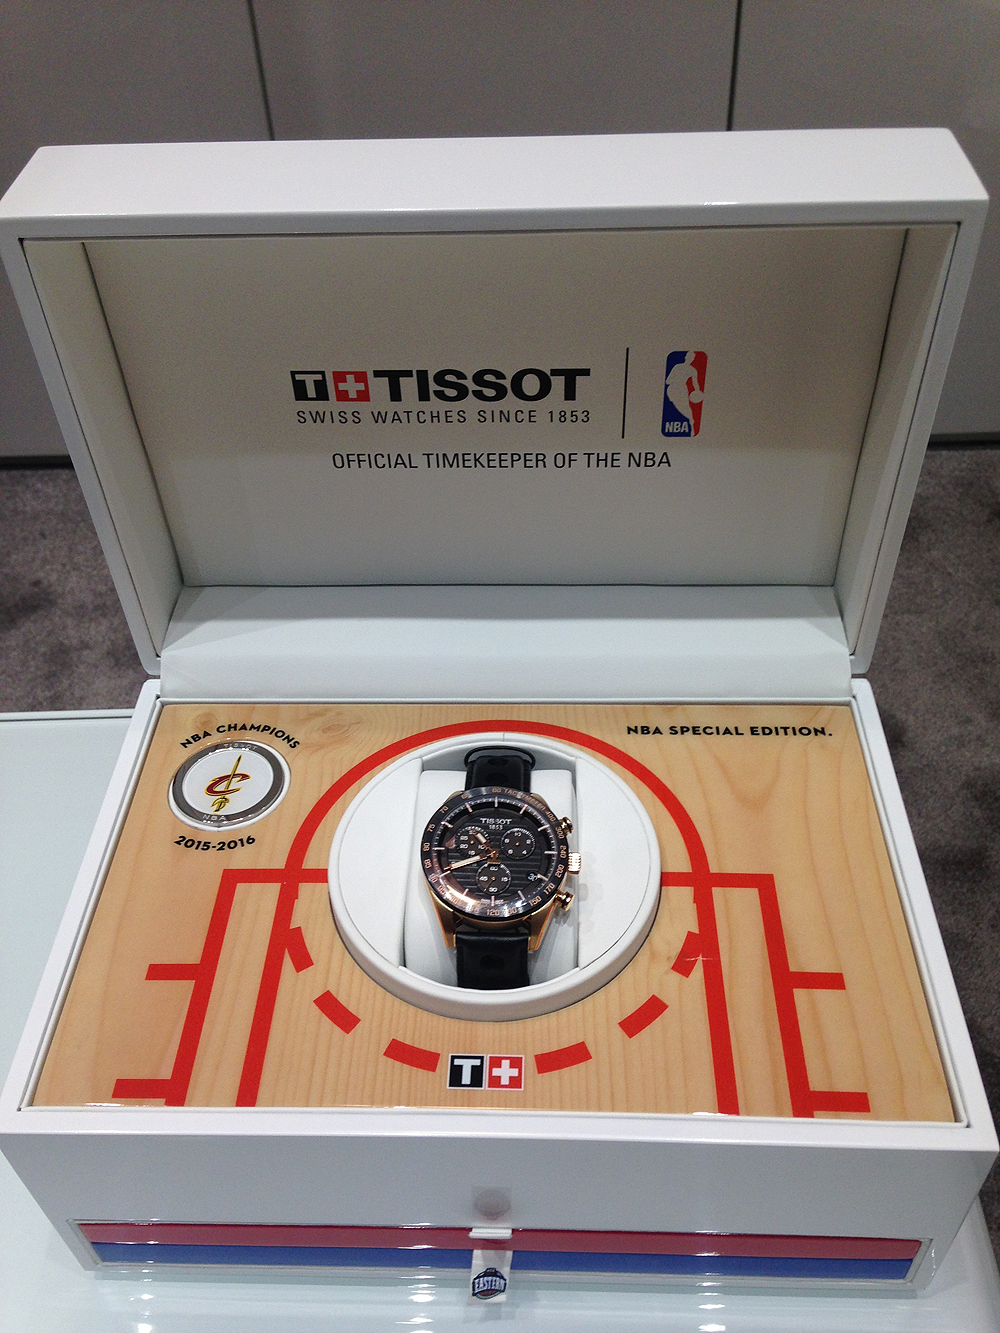 Tissot Releases the Official Cleveland Cavaliers NBA Championship Watch WatchTime